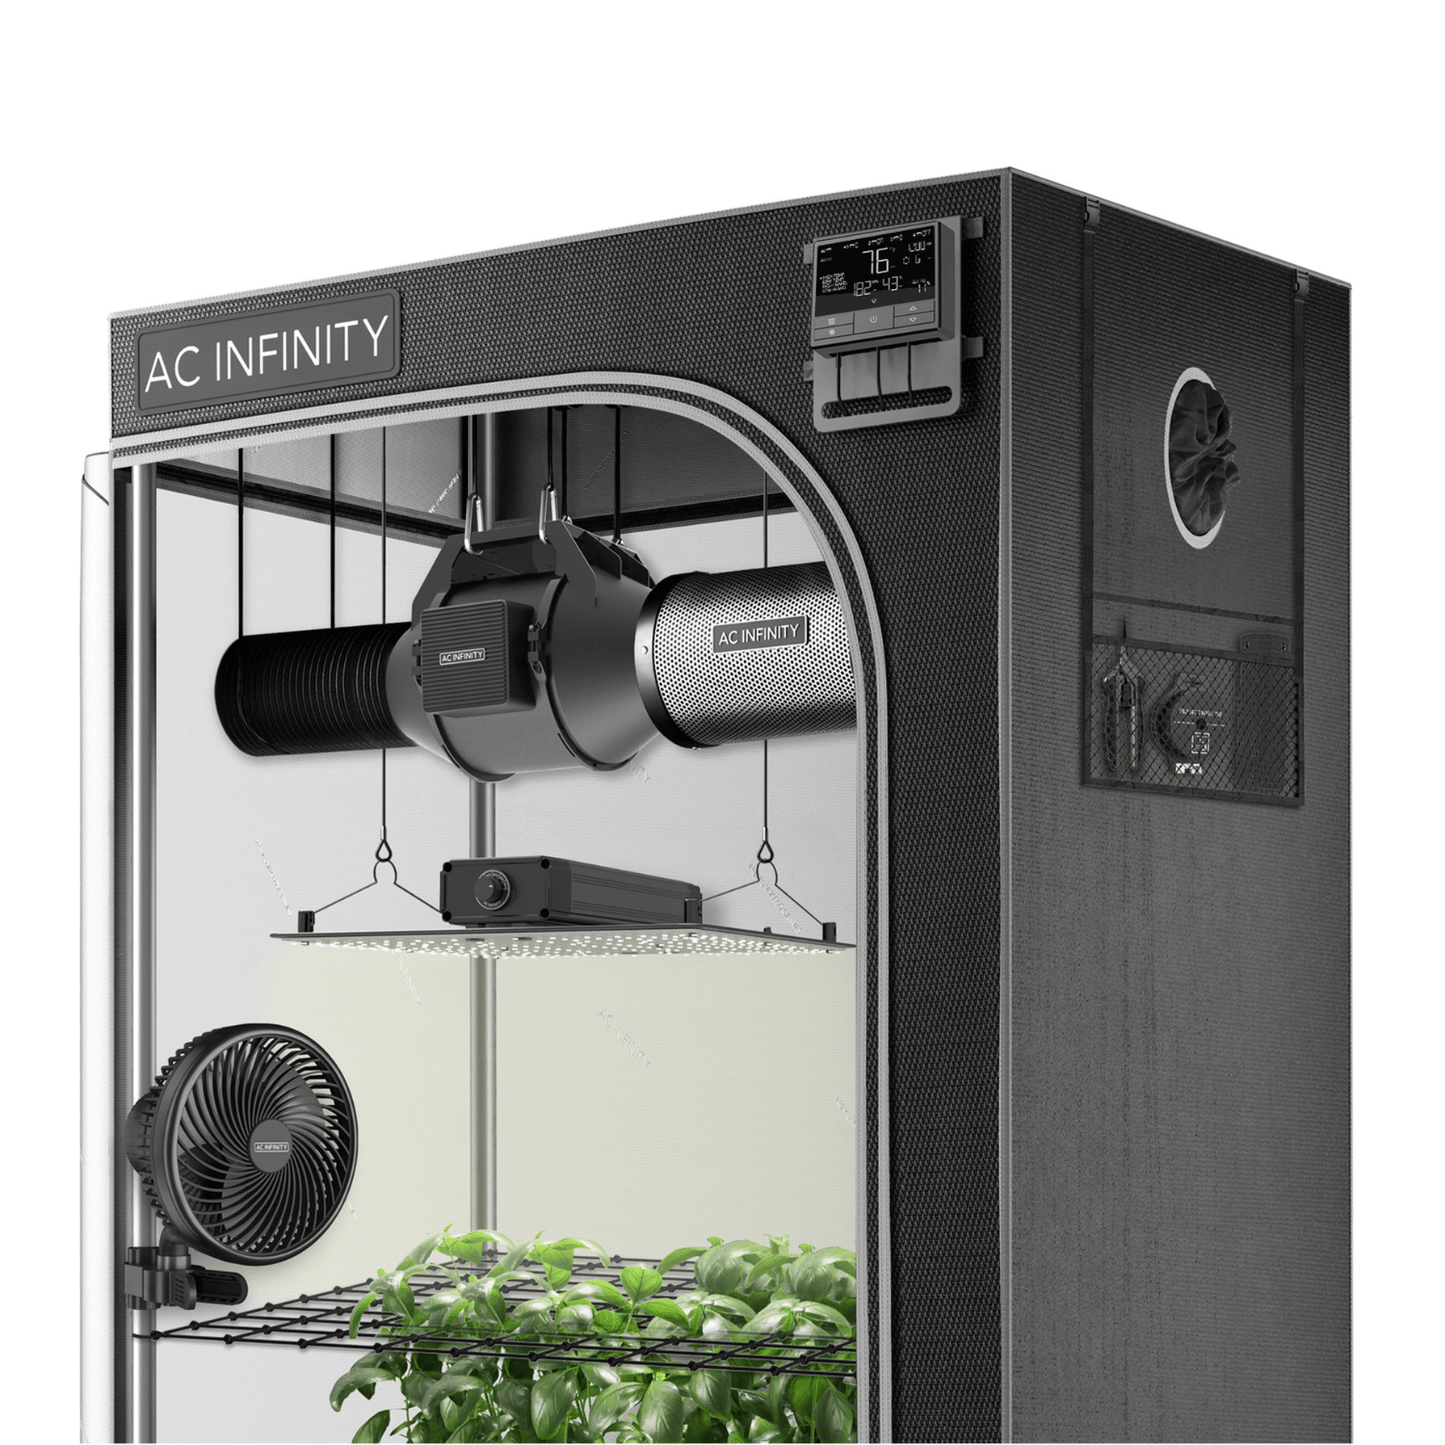 AC Infinity Advance Grow Tent System 2x2, 1-Plant Kit, Integrated Smart Controls to Automate Ventilation, Circulation, Full Spectrum LED Grow Light AC-PKB22 Kits